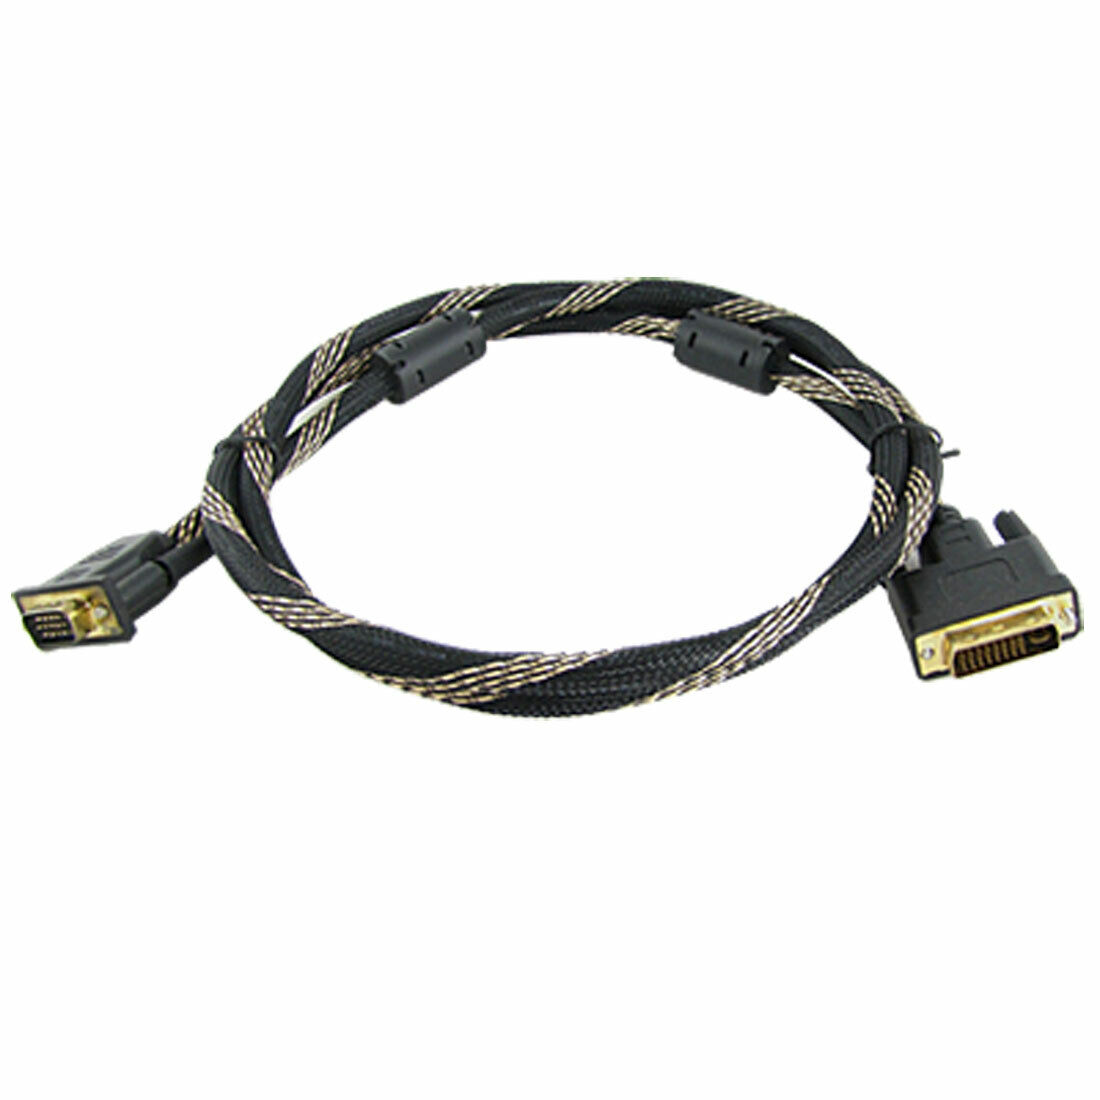 DVI-I Dual Link Male to VGA 15 Pin Male Adapter Cable Cord 1.5m for Laptop PC